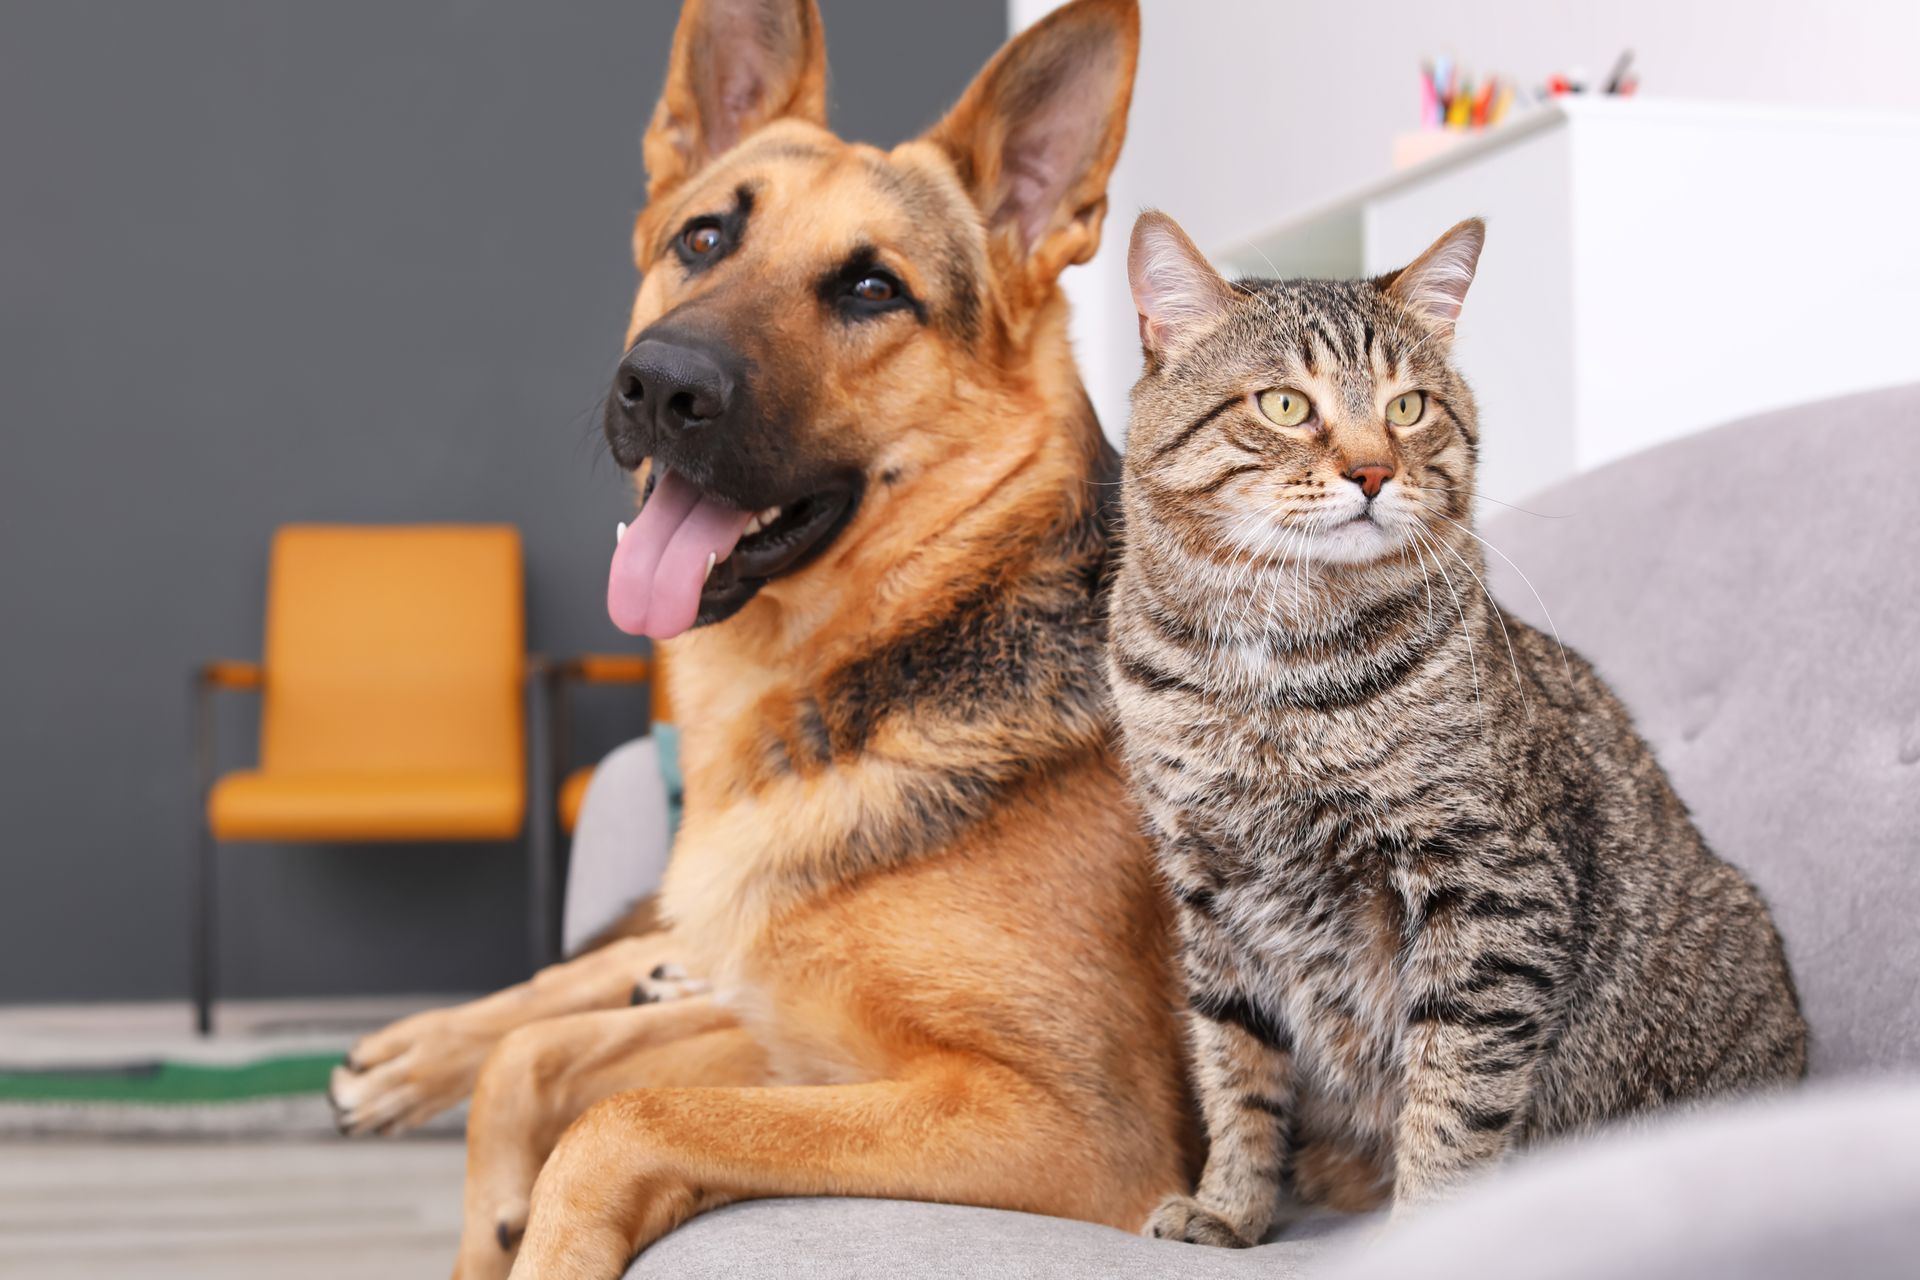 Pets can get sick if they ingest cicadas - cat & dog